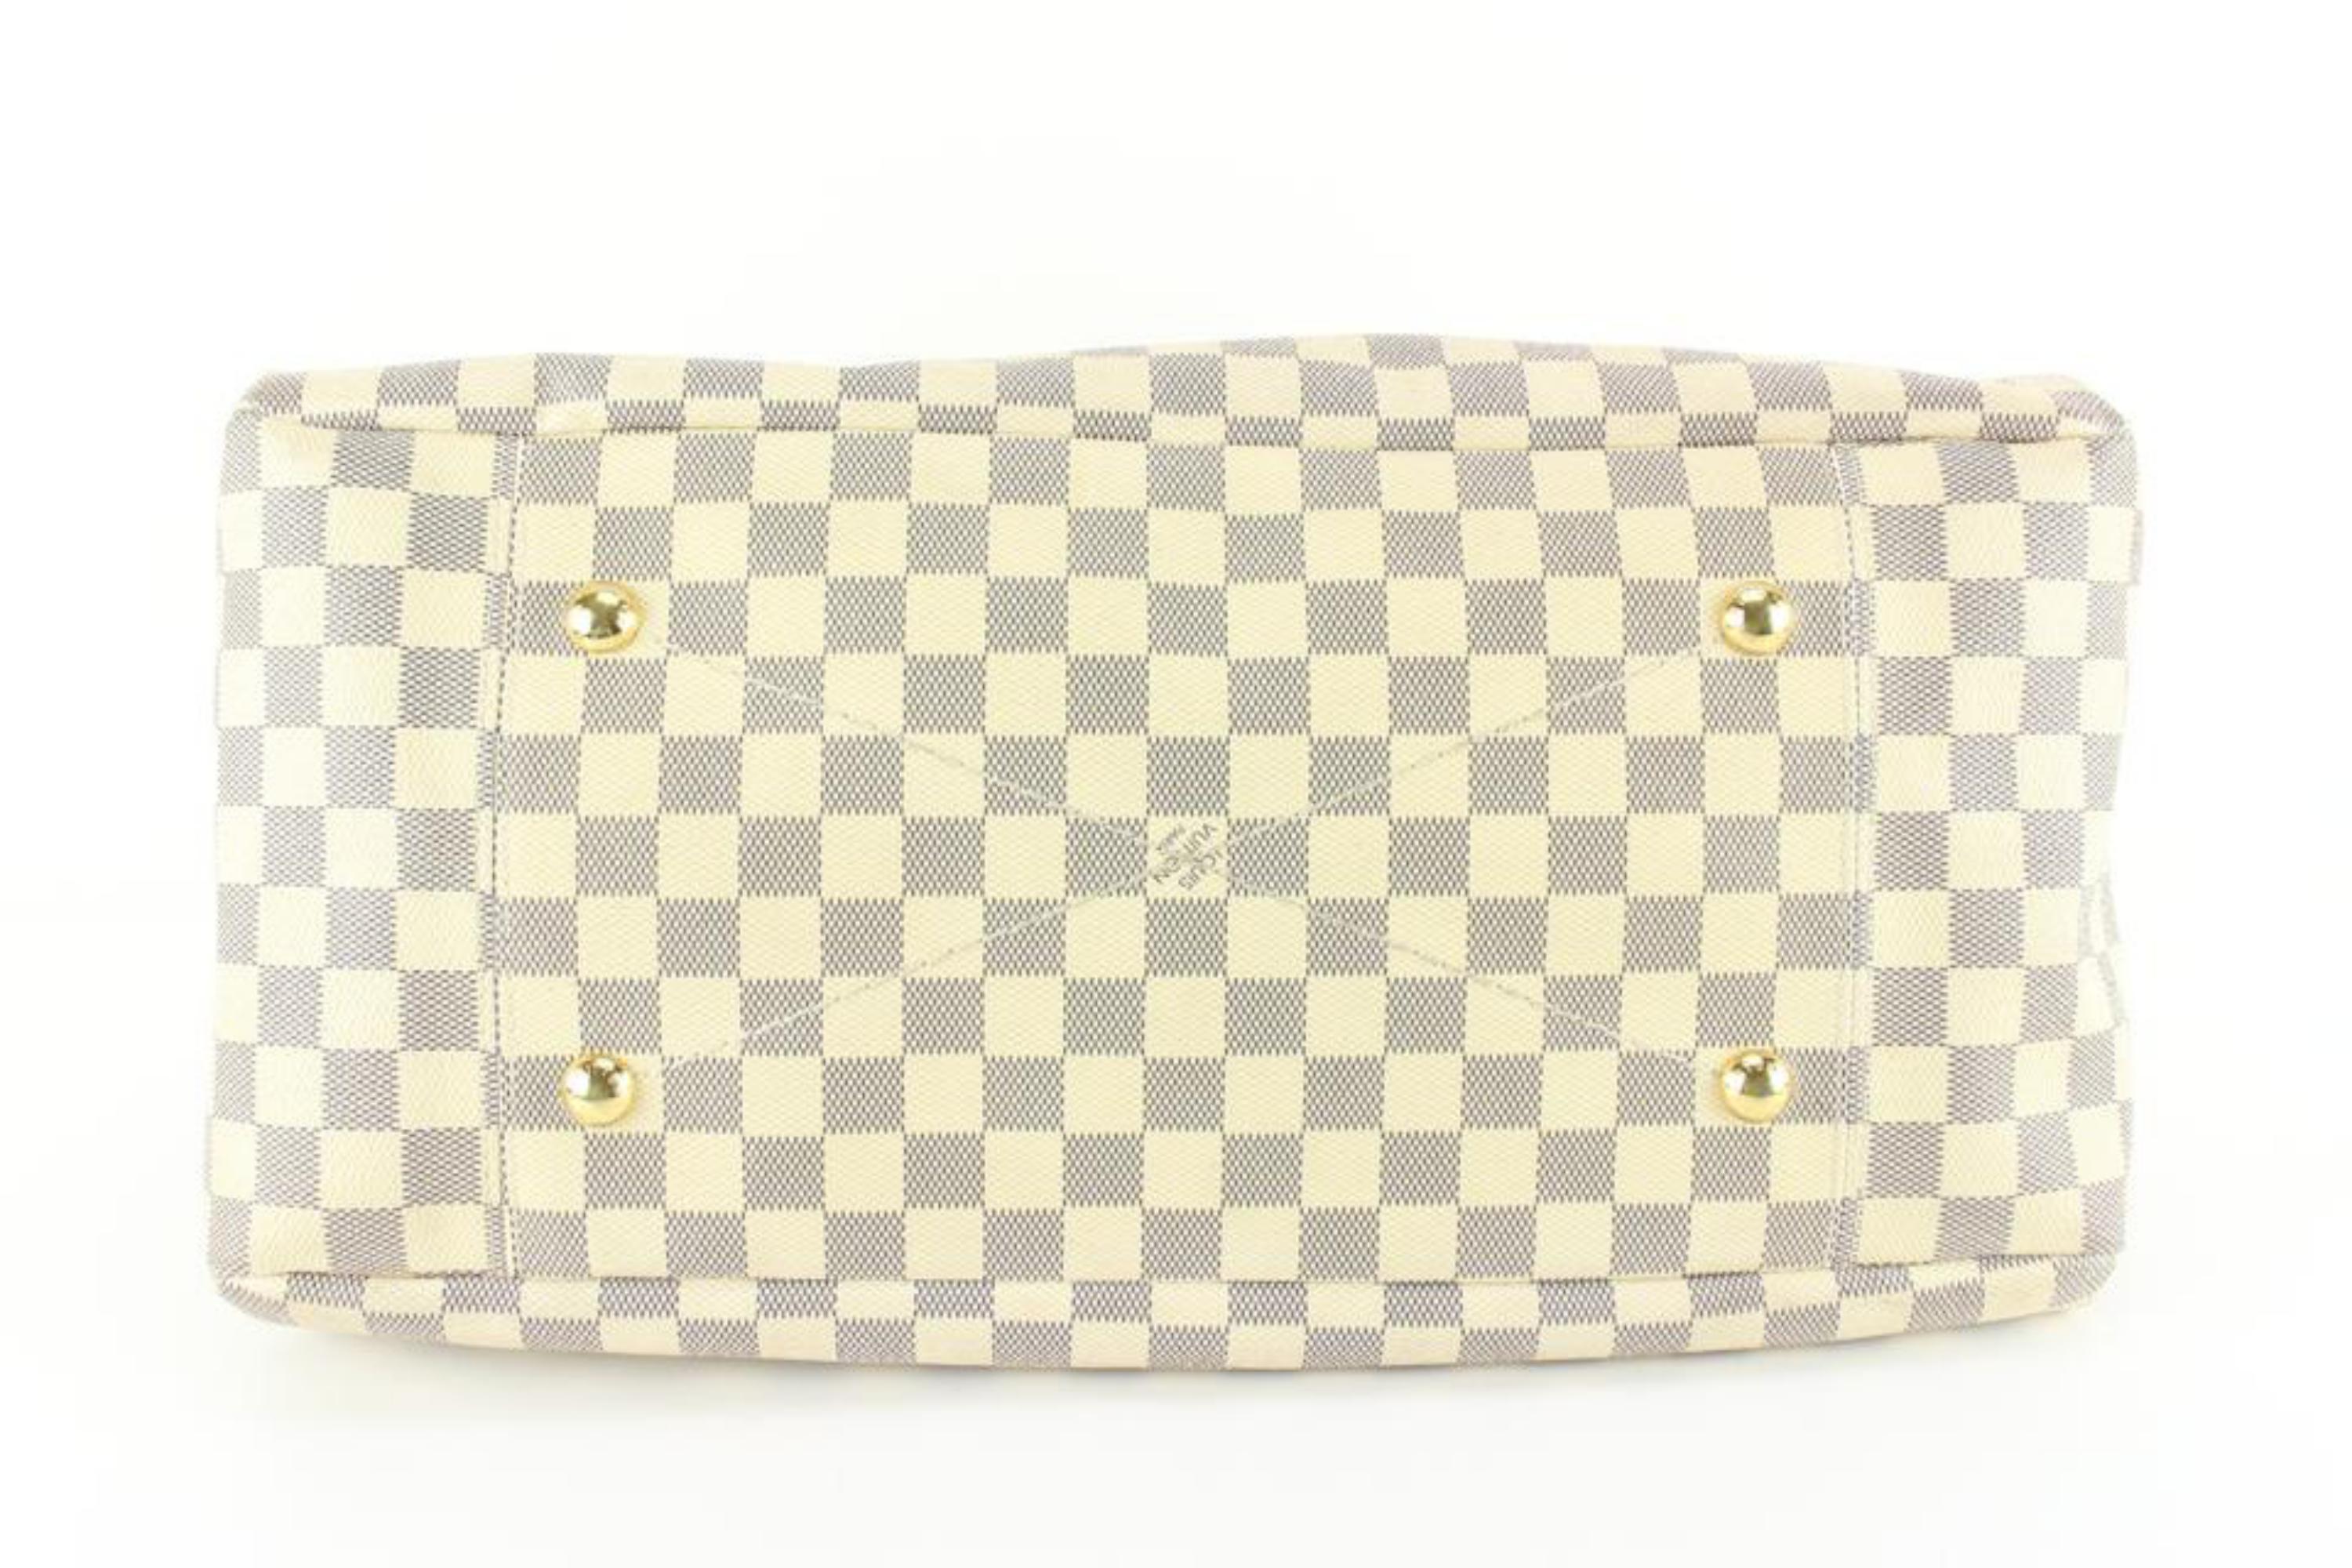 Louis Vuitton Damier Azur Artsy Hobo Bag 28lk810s In Good Condition In Dix hills, NY